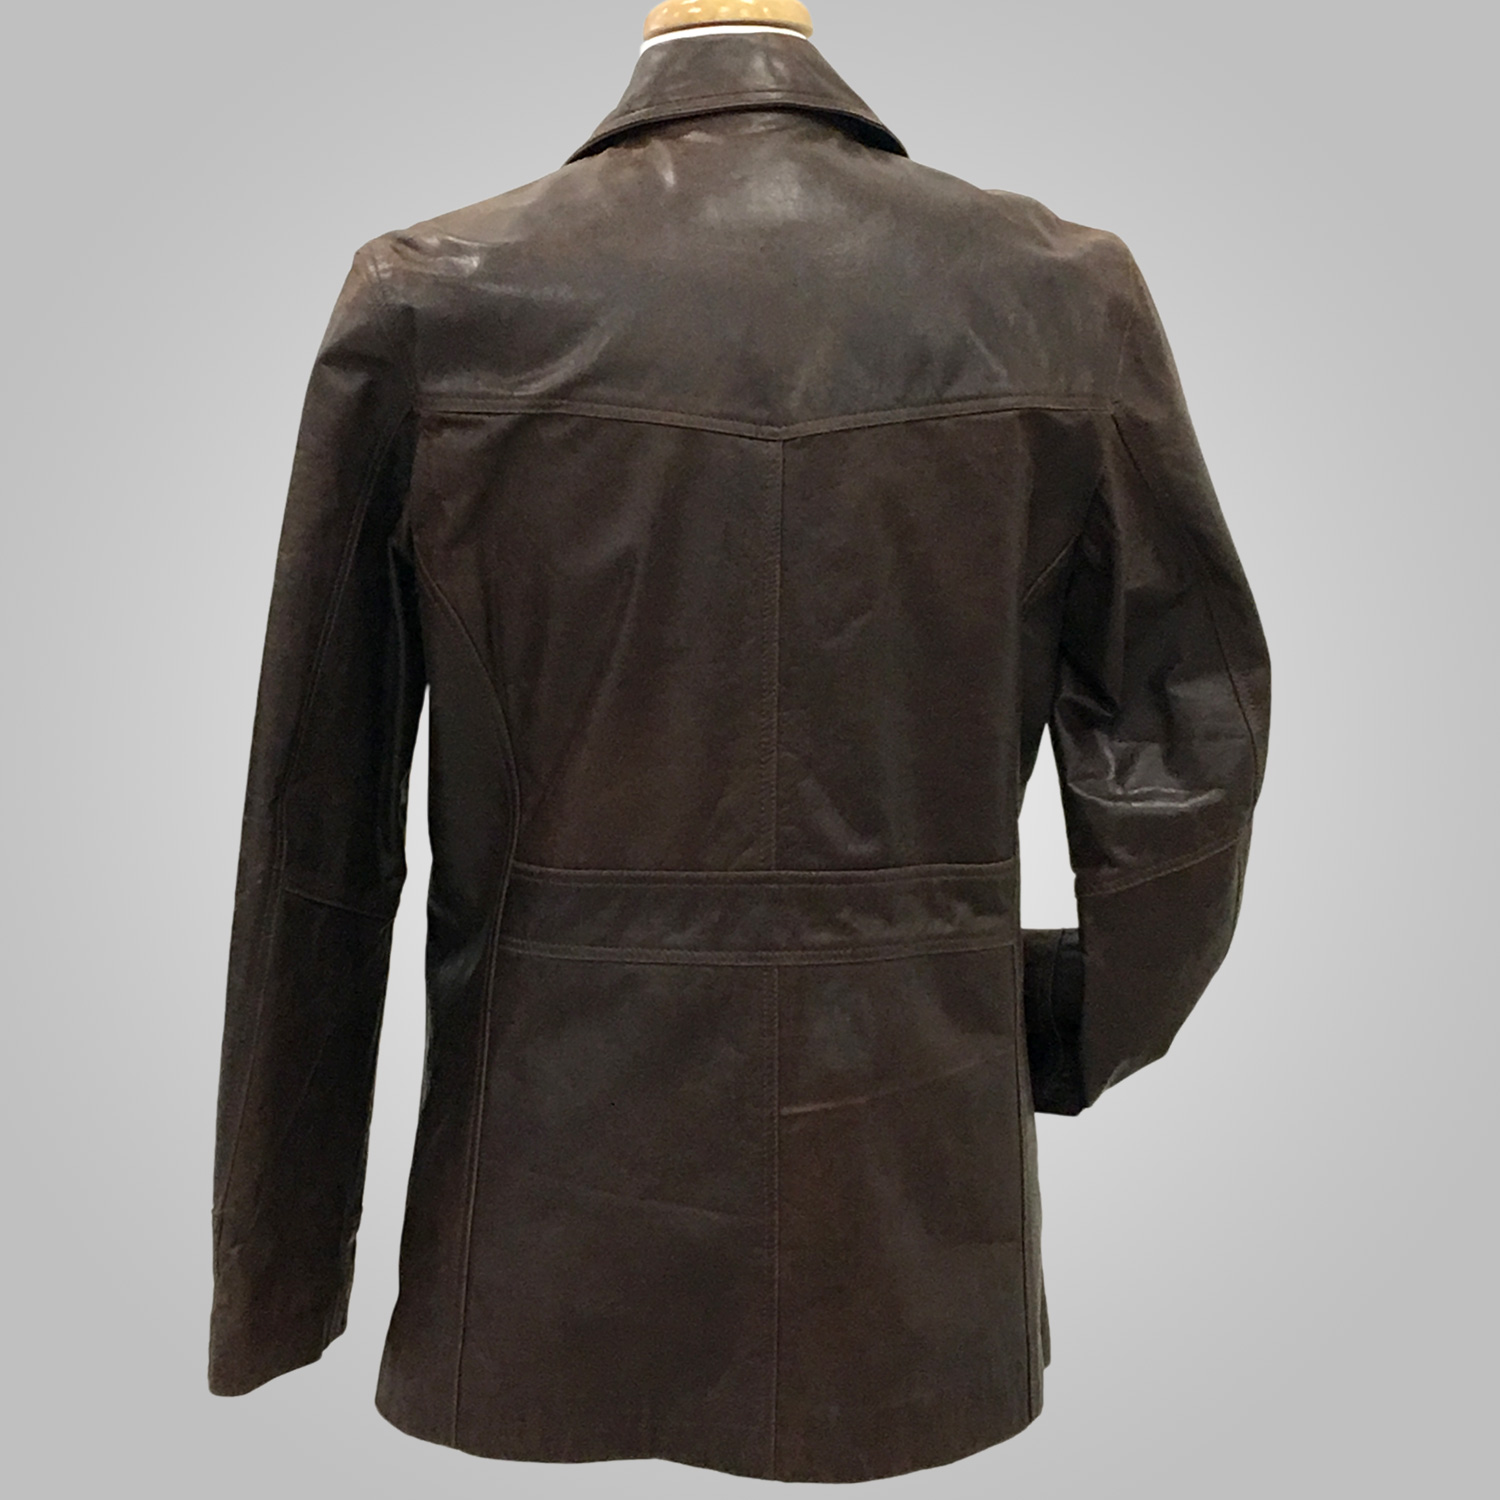 Brown Leather Jacket - Brown Max 001 - L'Aurore Leather Jacket